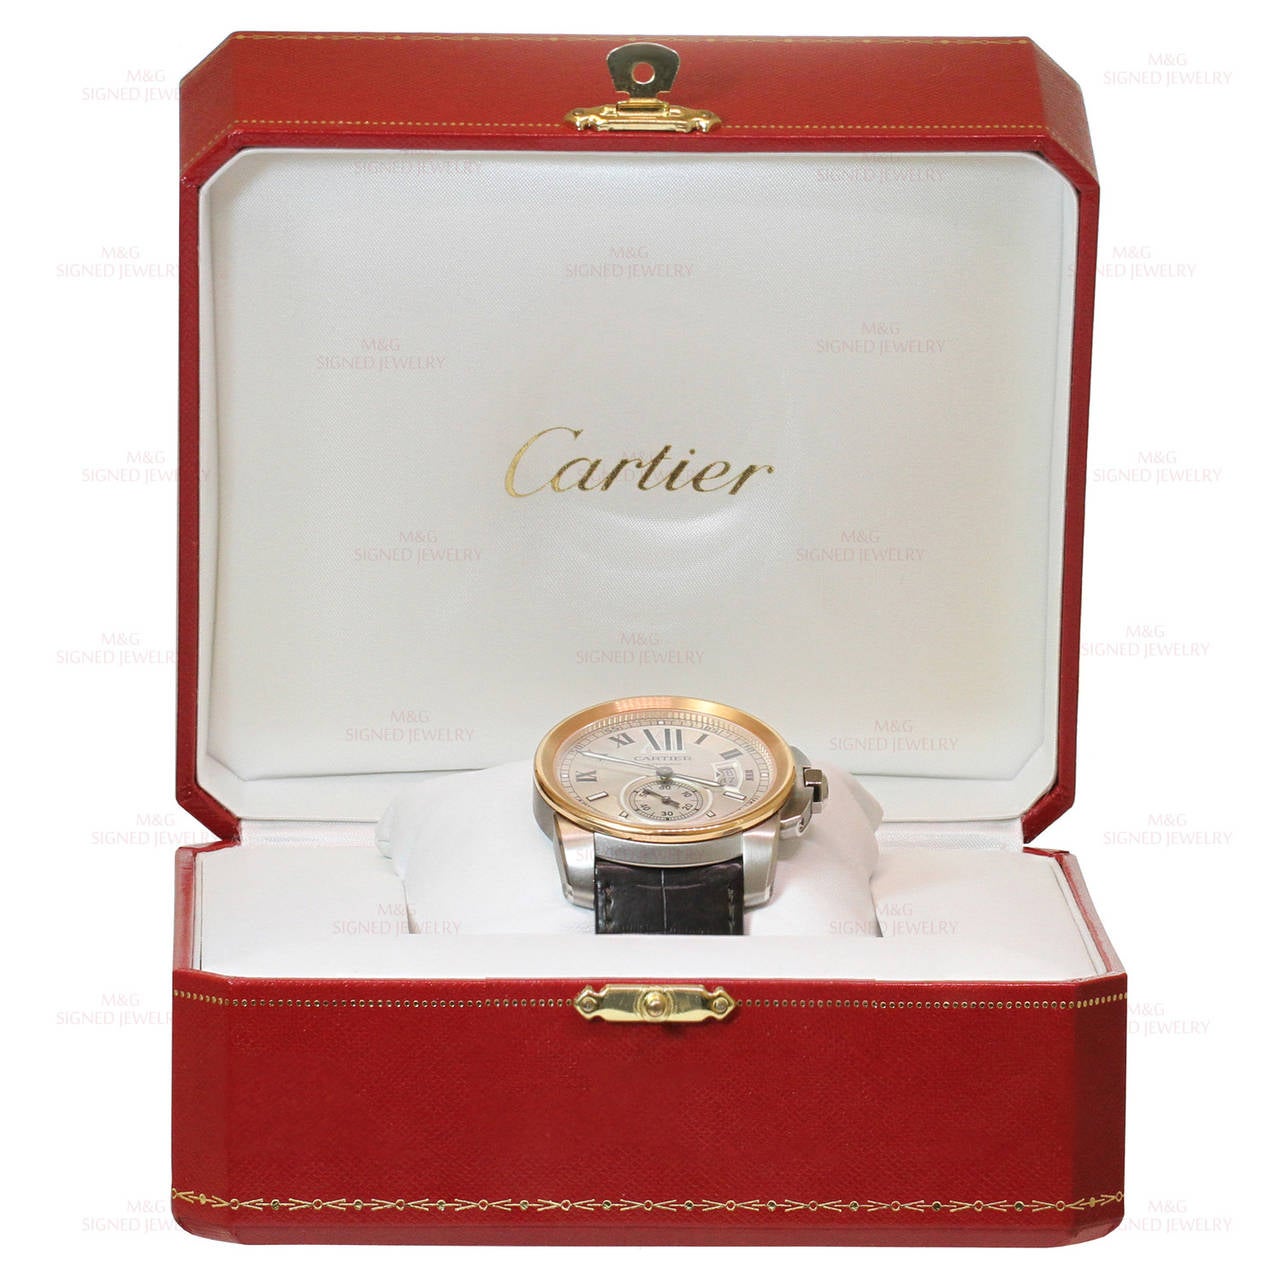 This classic all-original Cartier men's watch features automatic self-winding movement, round stainless steel case measuring 42.0 mm in diameter, a crown cover with faceted blue spinel, an exhibition case back, a high-polish 18k rose gold fixed